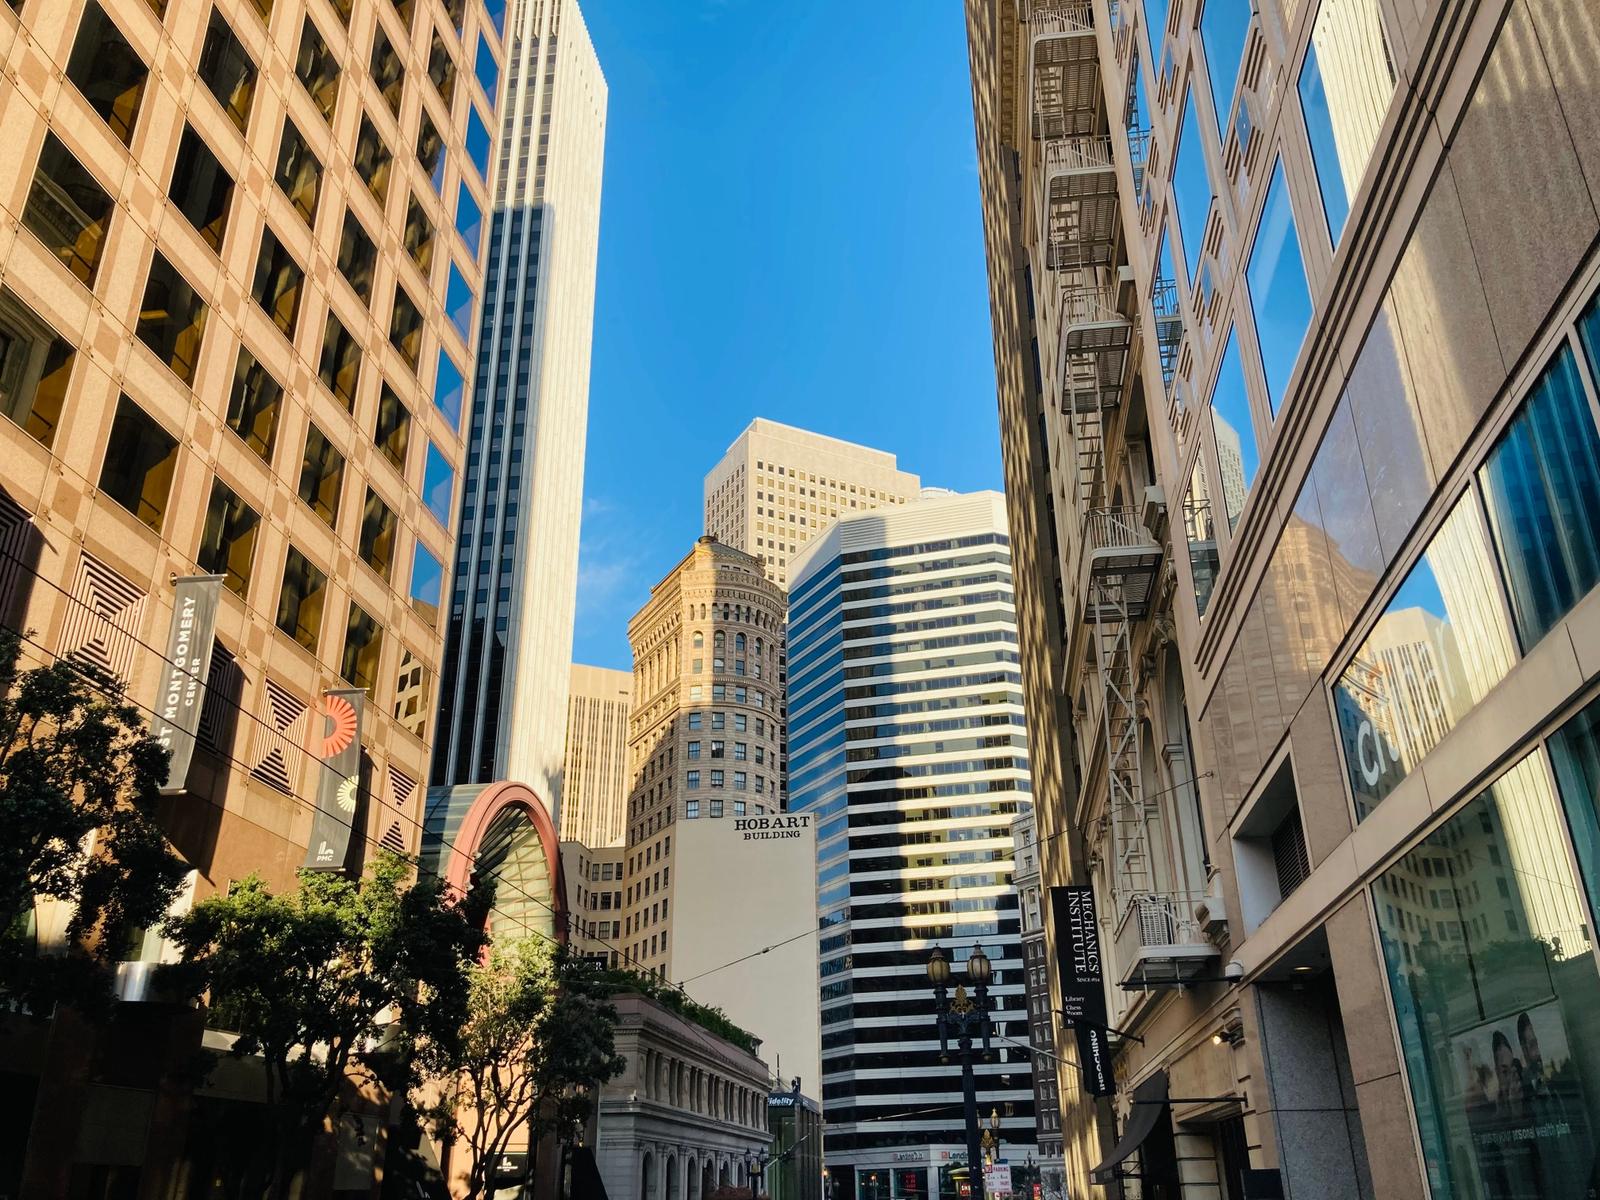 Large and tall buildings against a blue sky